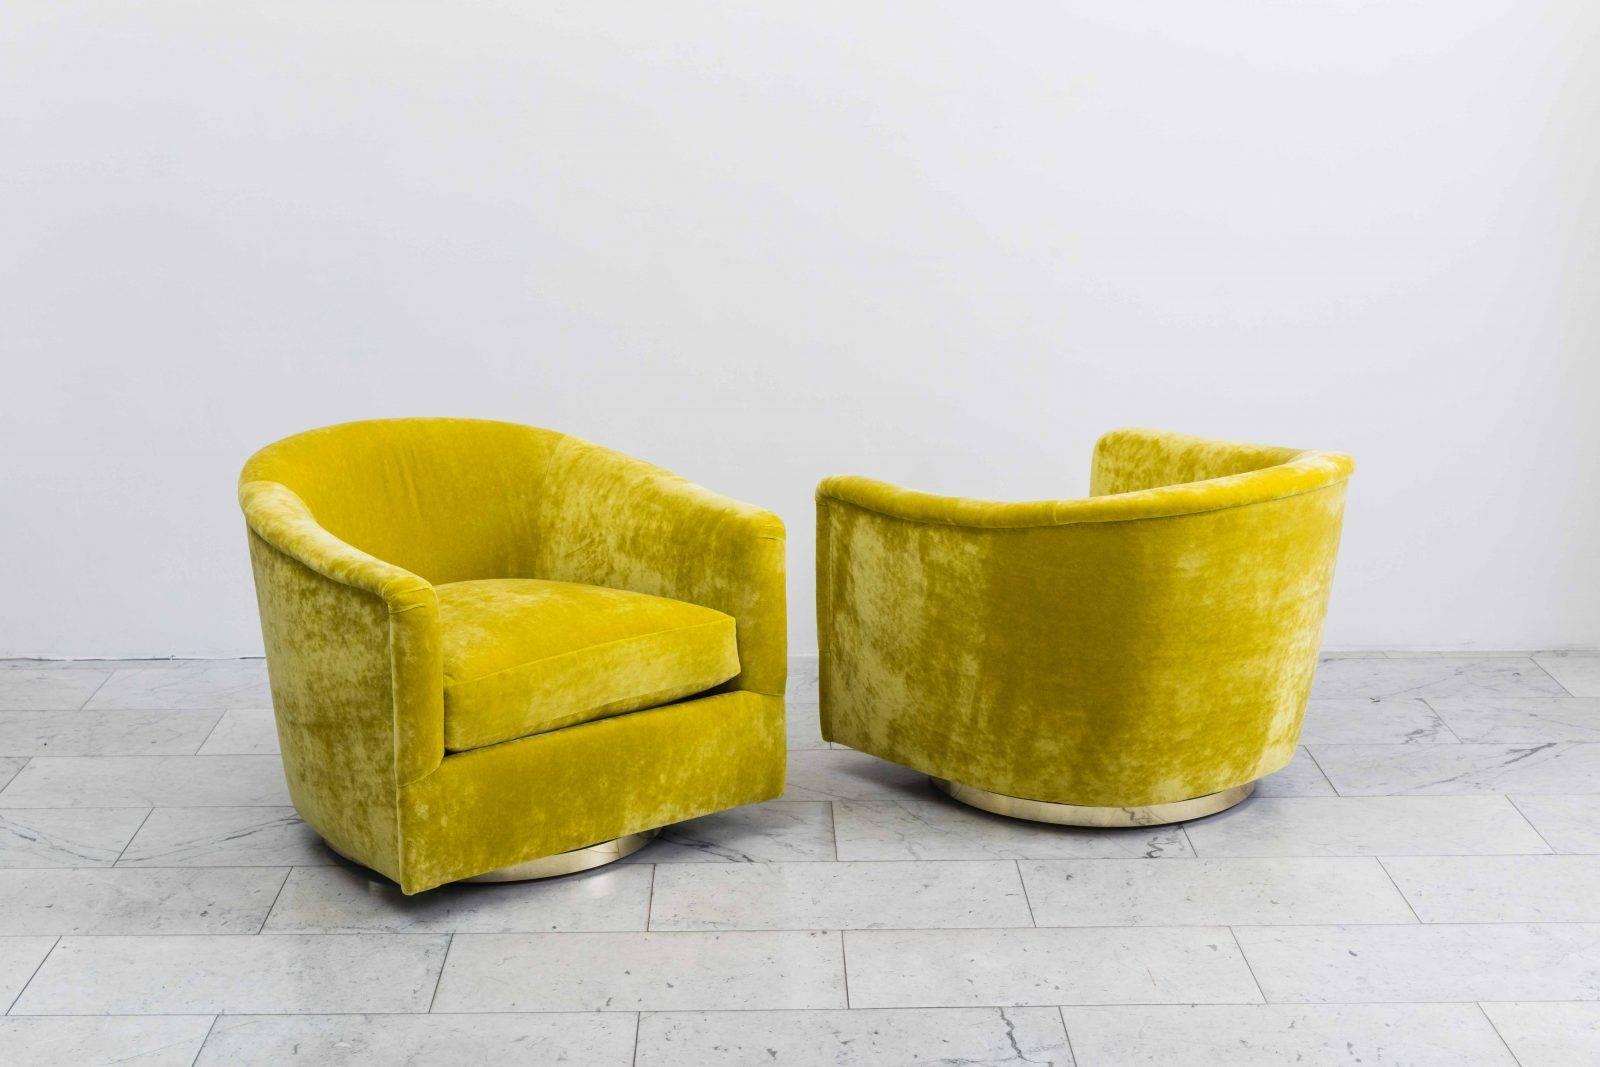 A beautiful pair of swivel chairs designed by Milo Baughman. Each chair has a circular bronze base that swivels with ease. Elegant in design, the chairs are also extremely comfortable, offering wonderful back support. The chairs feature new